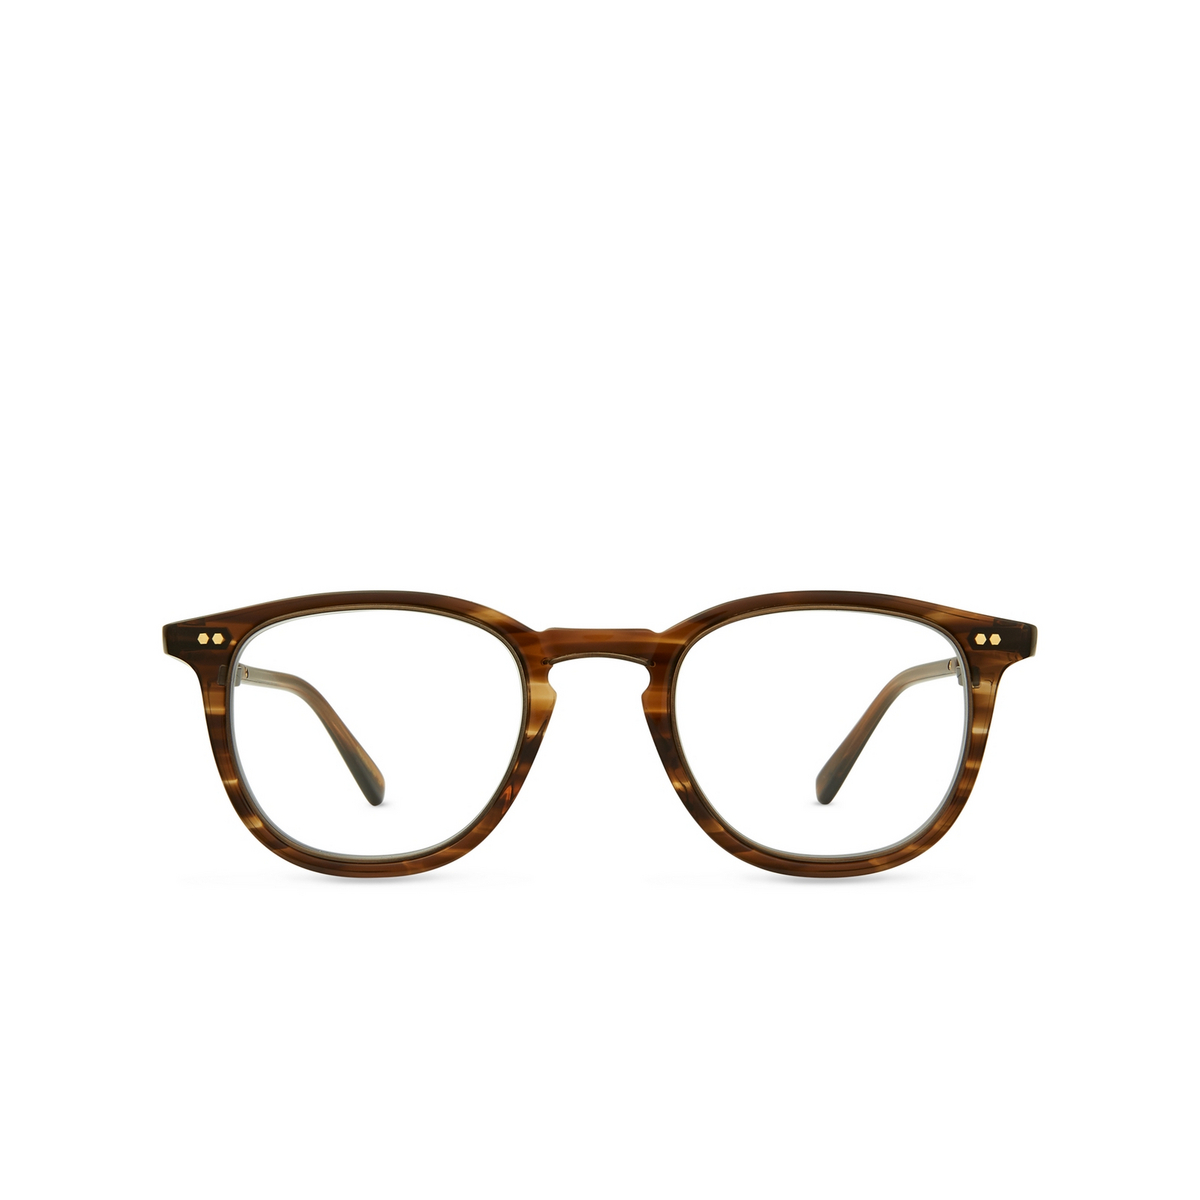 Mr. Leight COOPERS C Eyeglasses TOB-ATG Tobacco-Antique Gold - front view